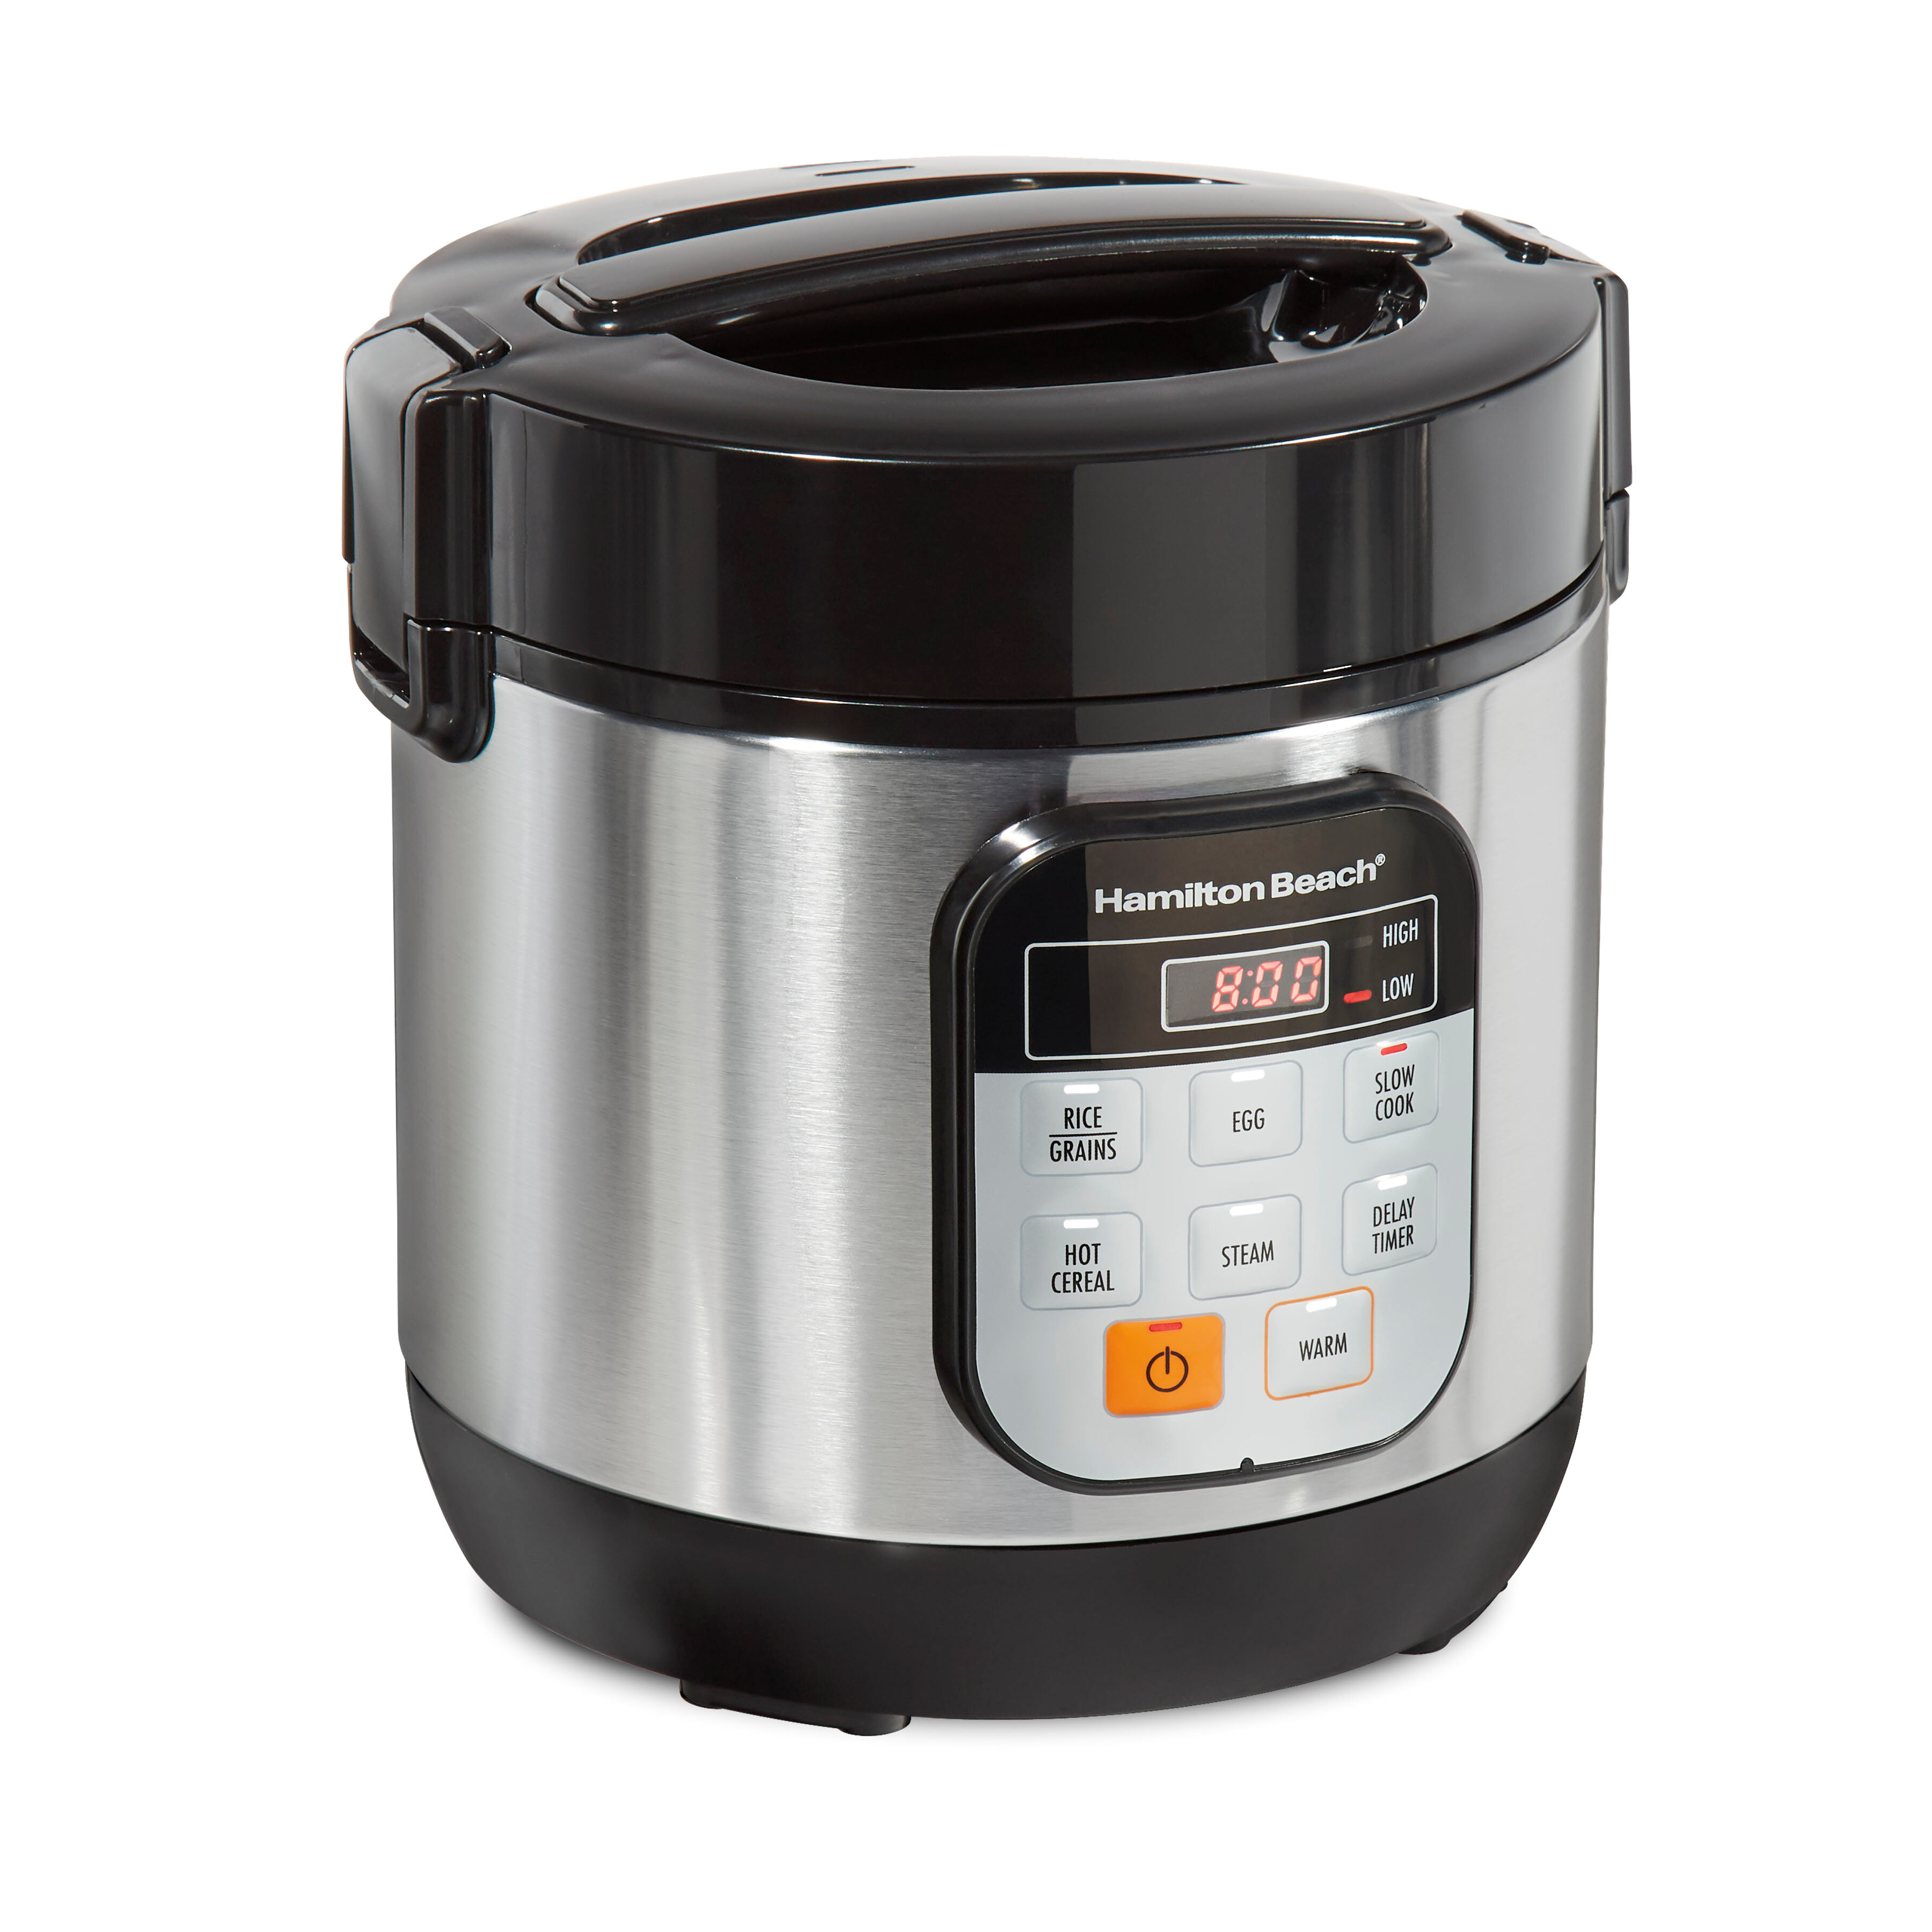 A Delicious Dinner made with the Hamilton Beach Multi-Function Rice Cooker